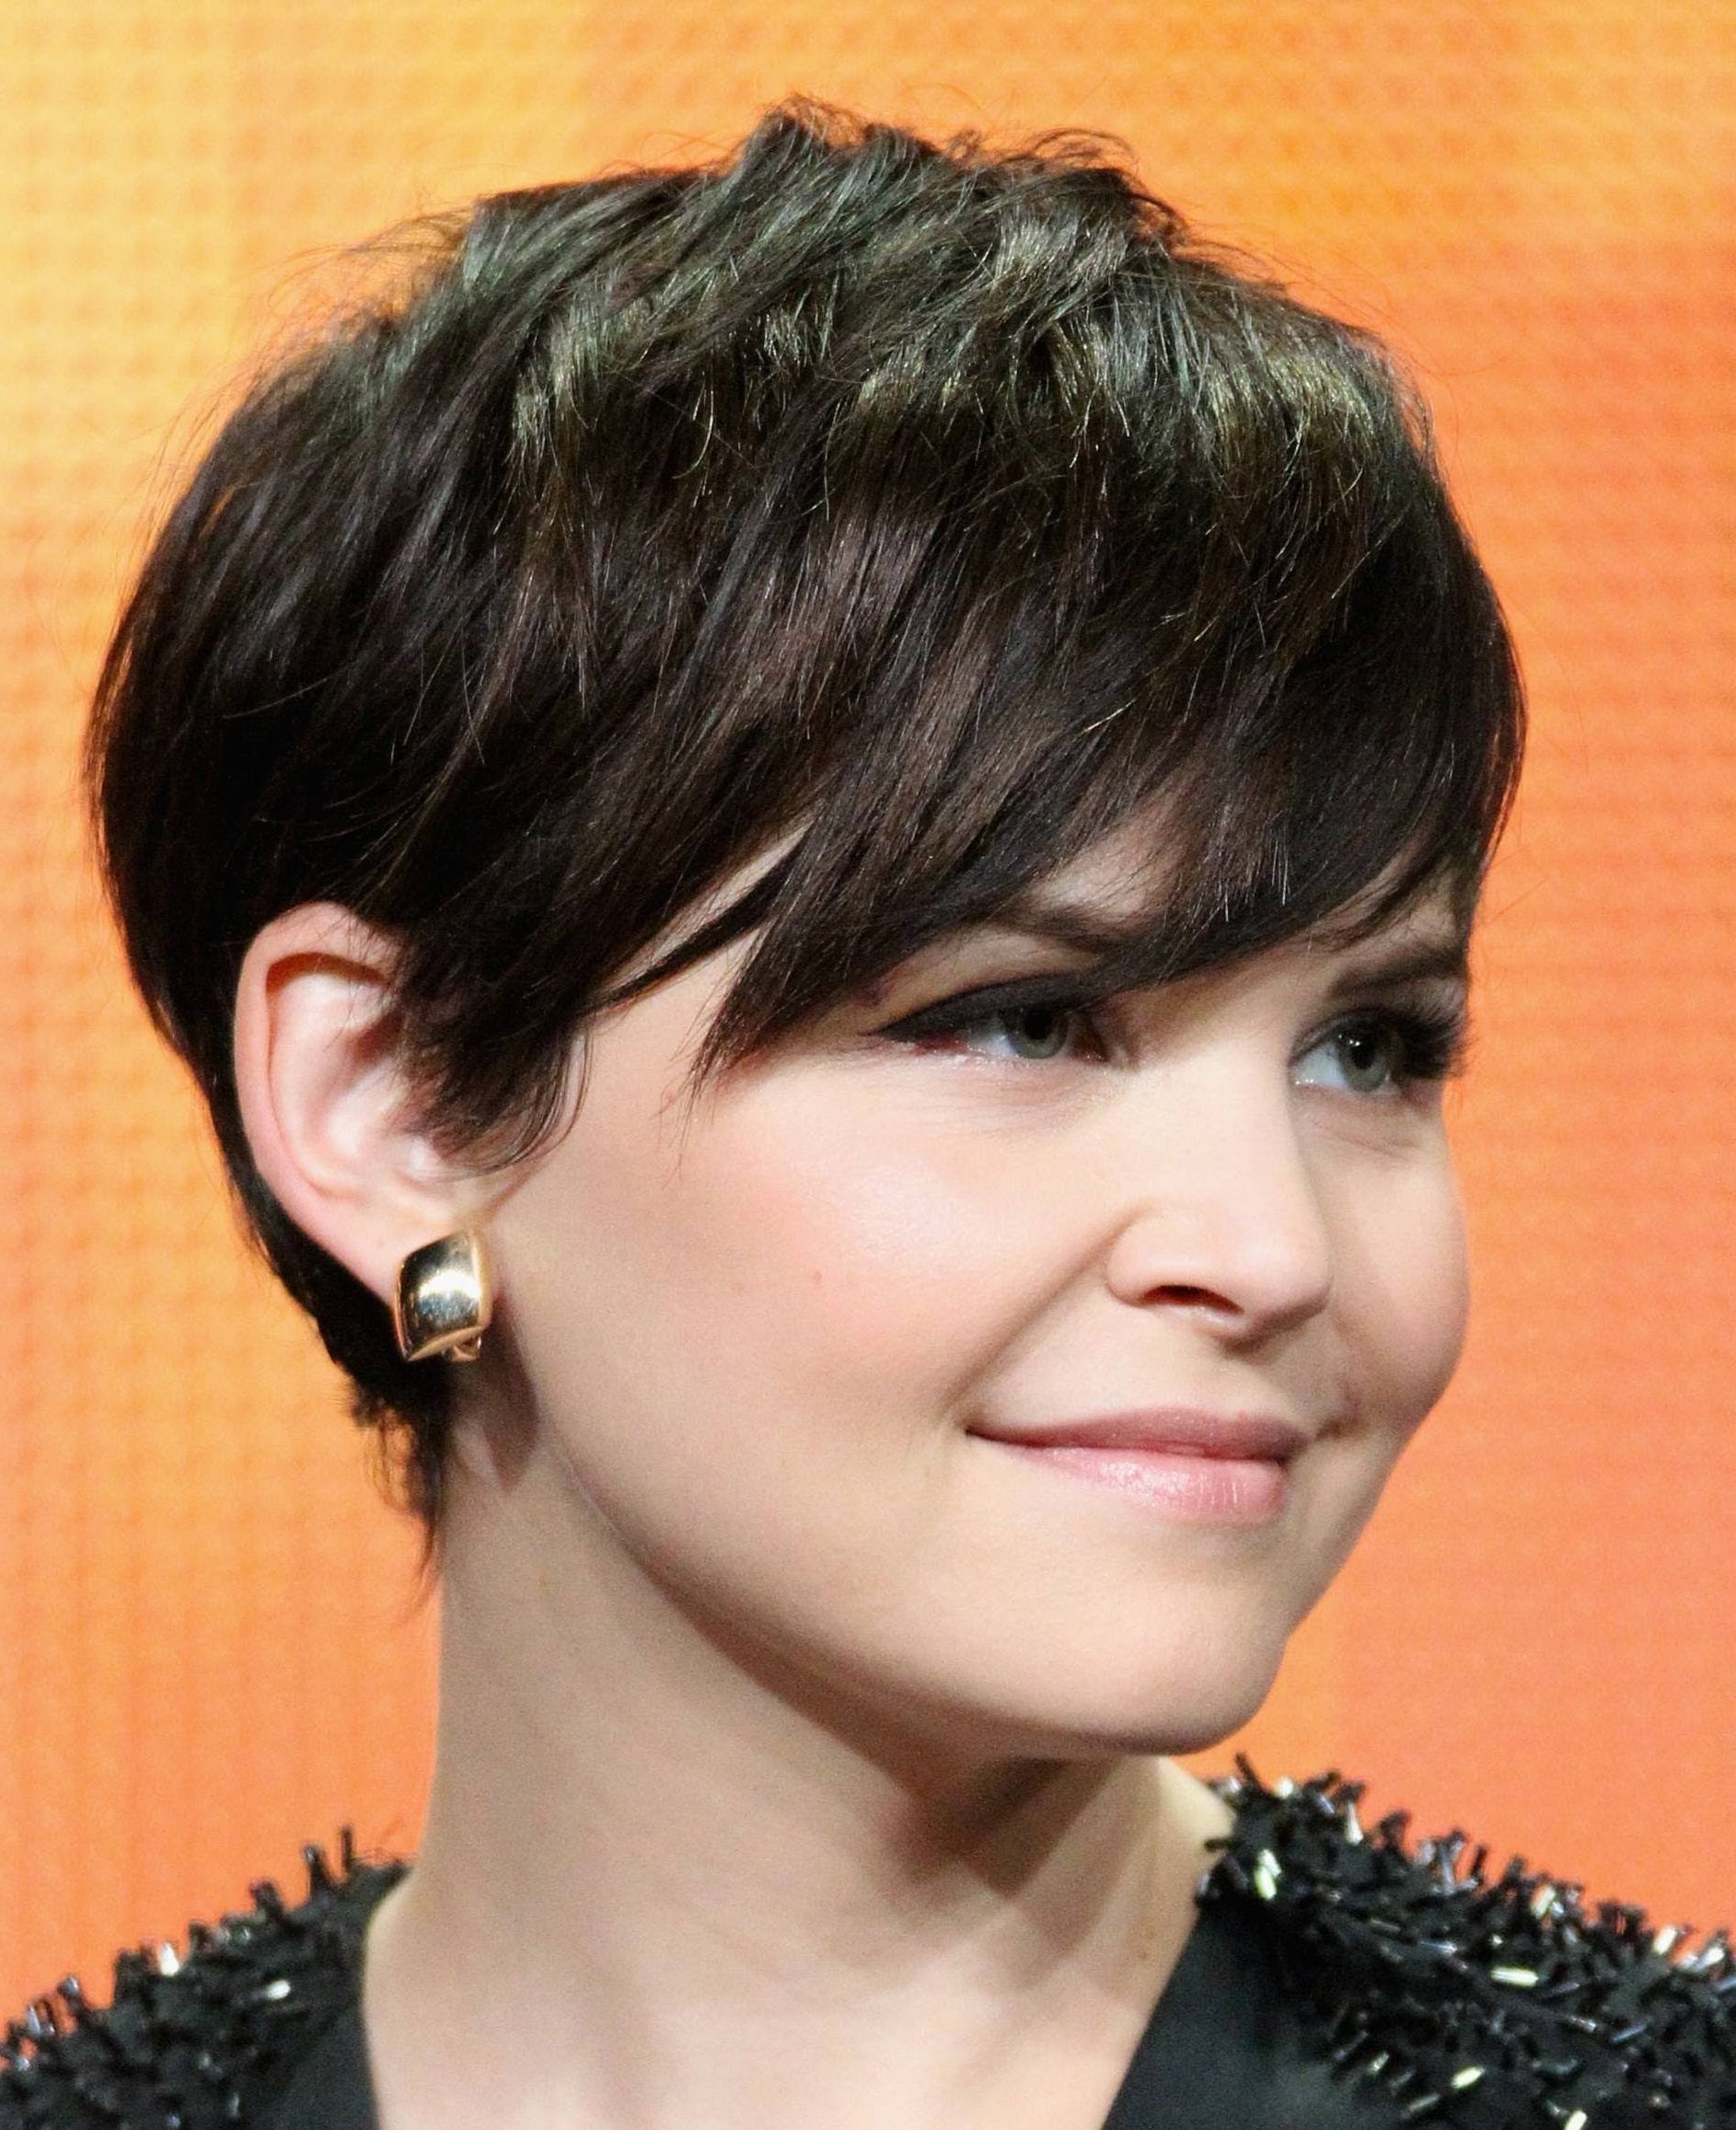 Ginnifer Goodwin Pixie Haircut Tutorial | The Salon Guy – Youtube With Regard To 2018 Fringe Pixie Hairstyles (View 14 of 15)